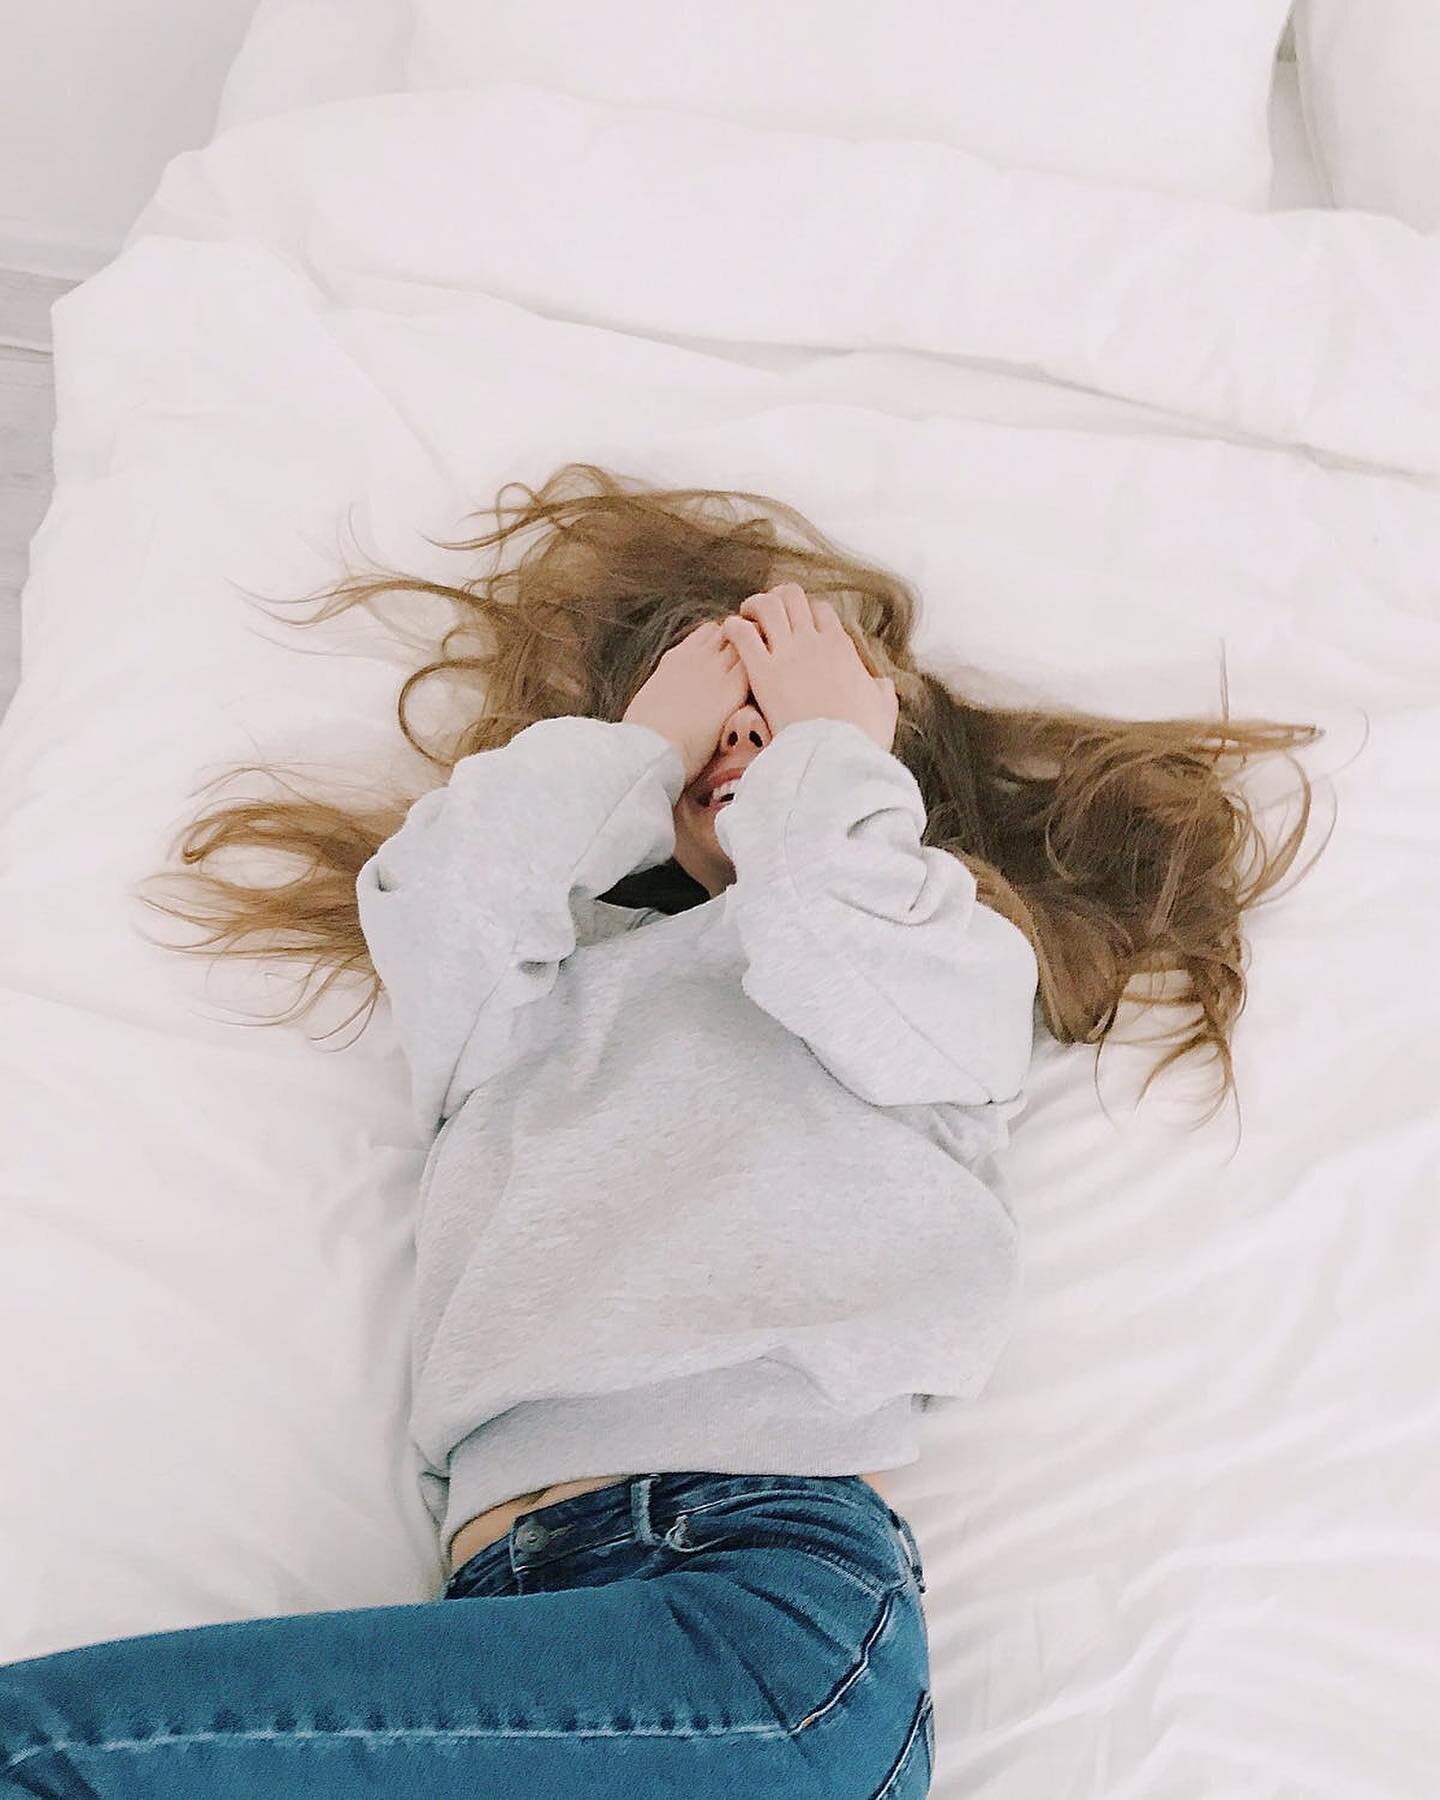 Who else slept in today? Healthy adults need between 7-9 hours of sleep per night to function at their best. Taking #CBD consistently can help regulate your sleep/wake cycles by promoting relaxation at night and wakefulness during the day. 😴 🌞 #cbd